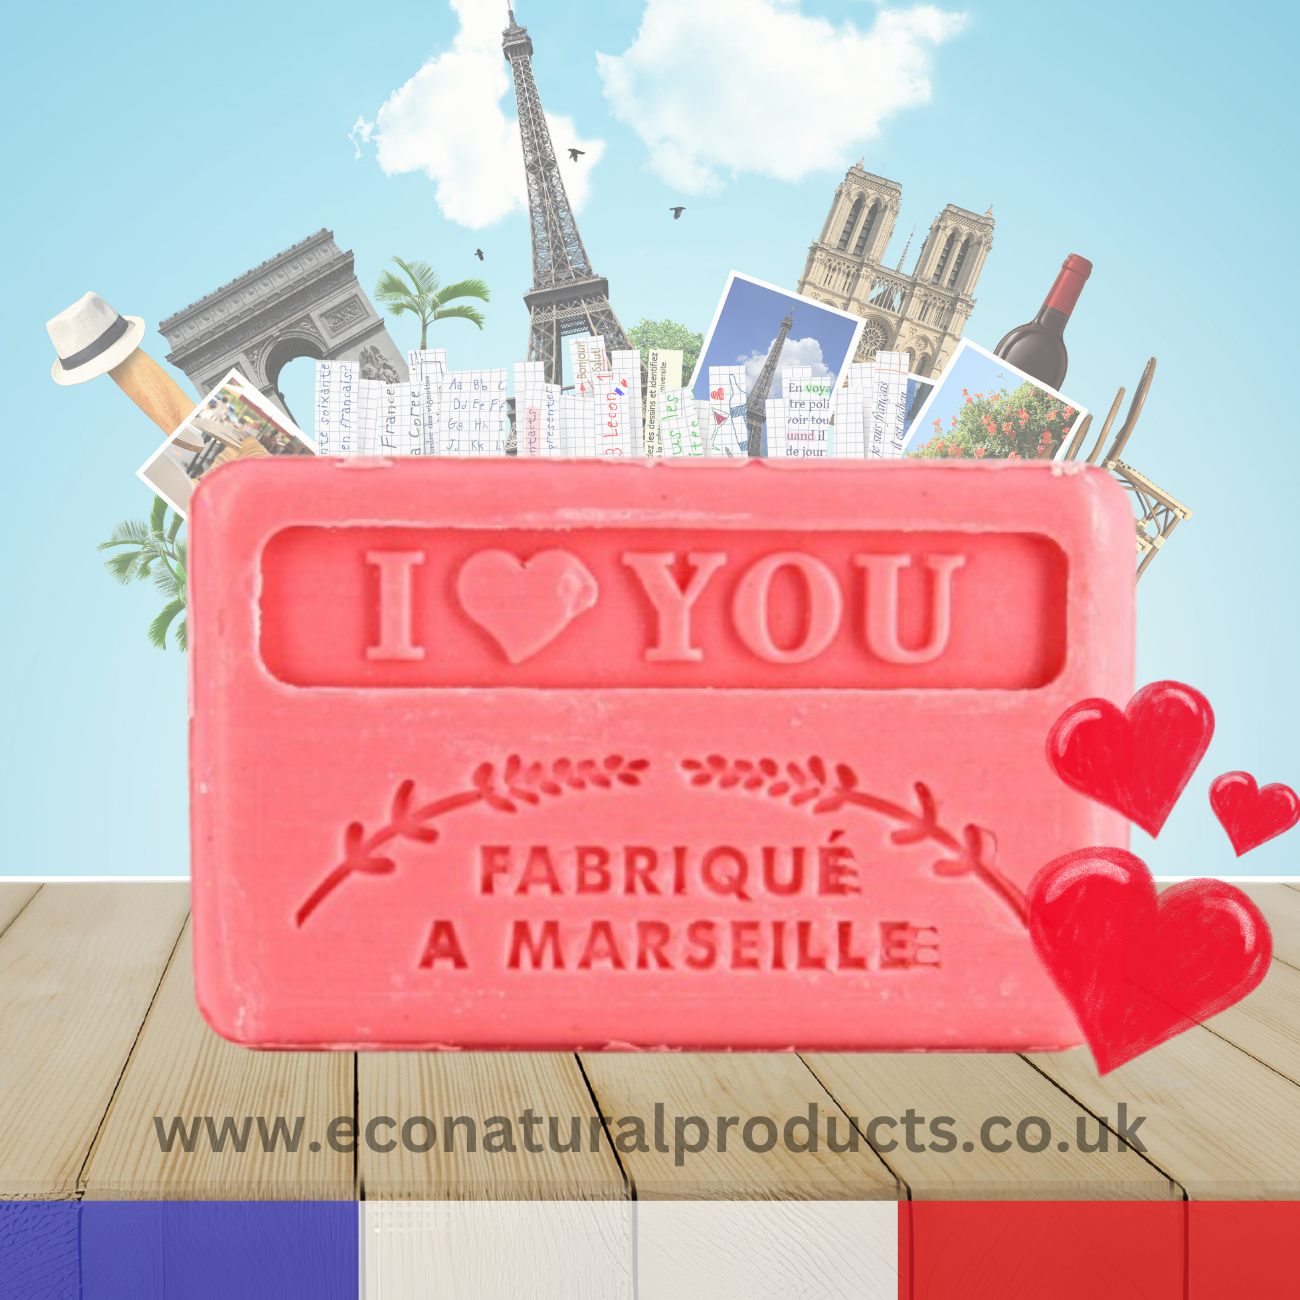 French Marseille Soap I Love You 60g